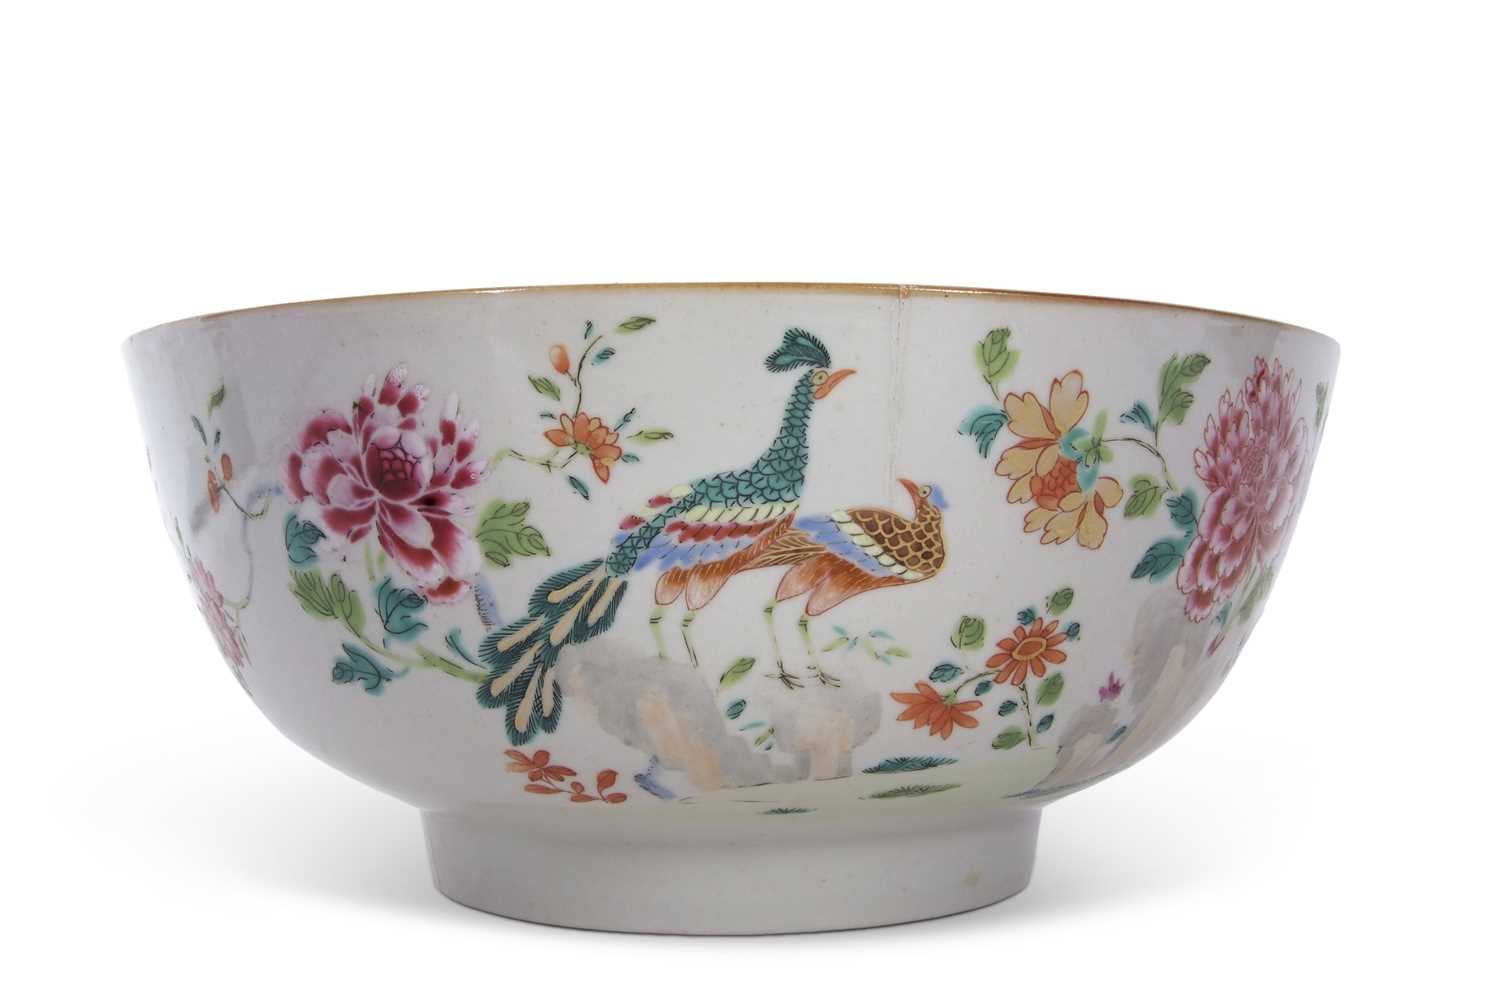 A large 18th Century Chinese porcelain famille rose punch bowl, decorated with birds amongst foliage